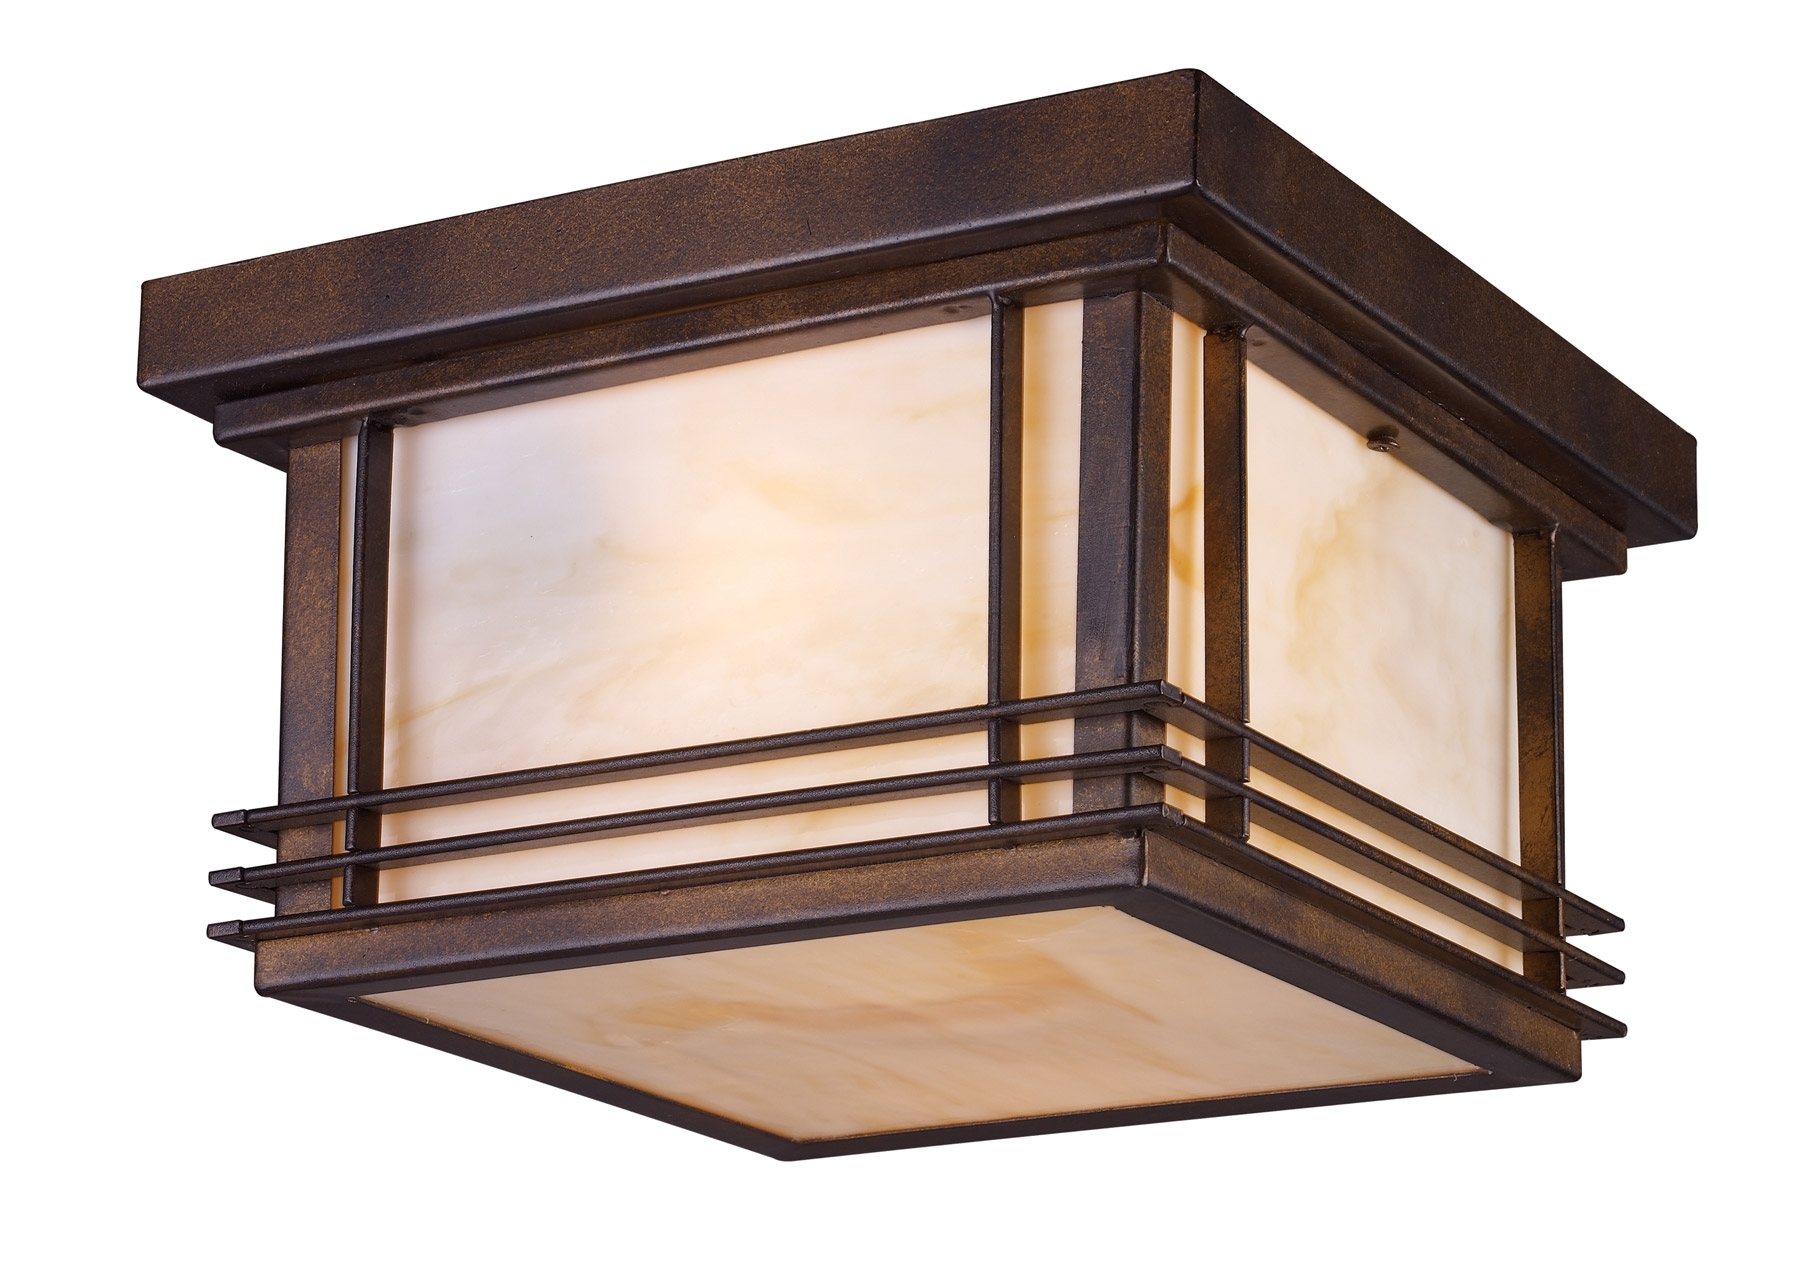 Mission Style Outdoor Ceiling Lights